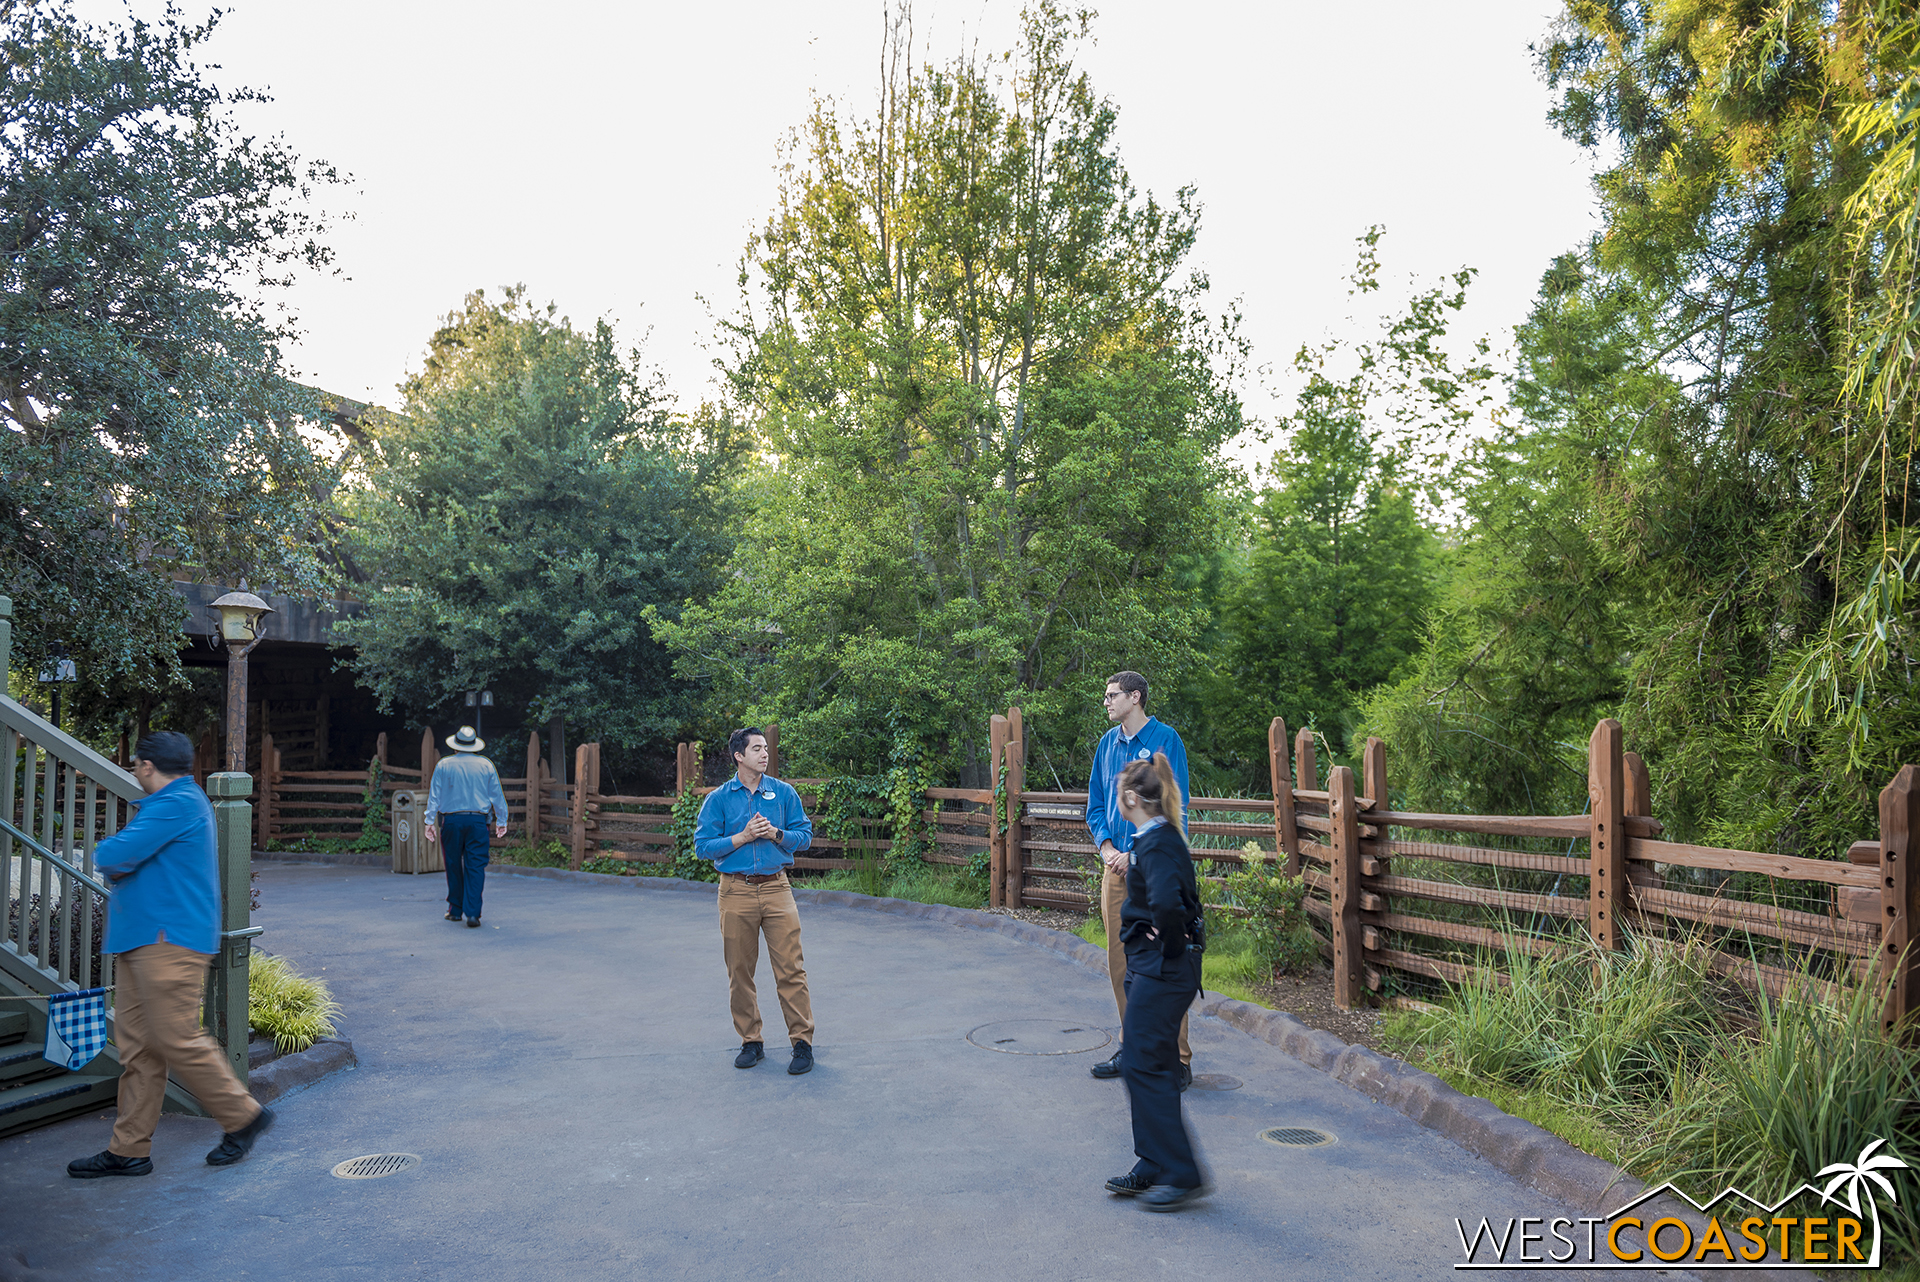  I was asked to not take pictures through the portal into Galaxy’s Edge on the Critter Country entrance, because I’d be able to see some foliage and pole lights within.  To be respectful, I complied. 